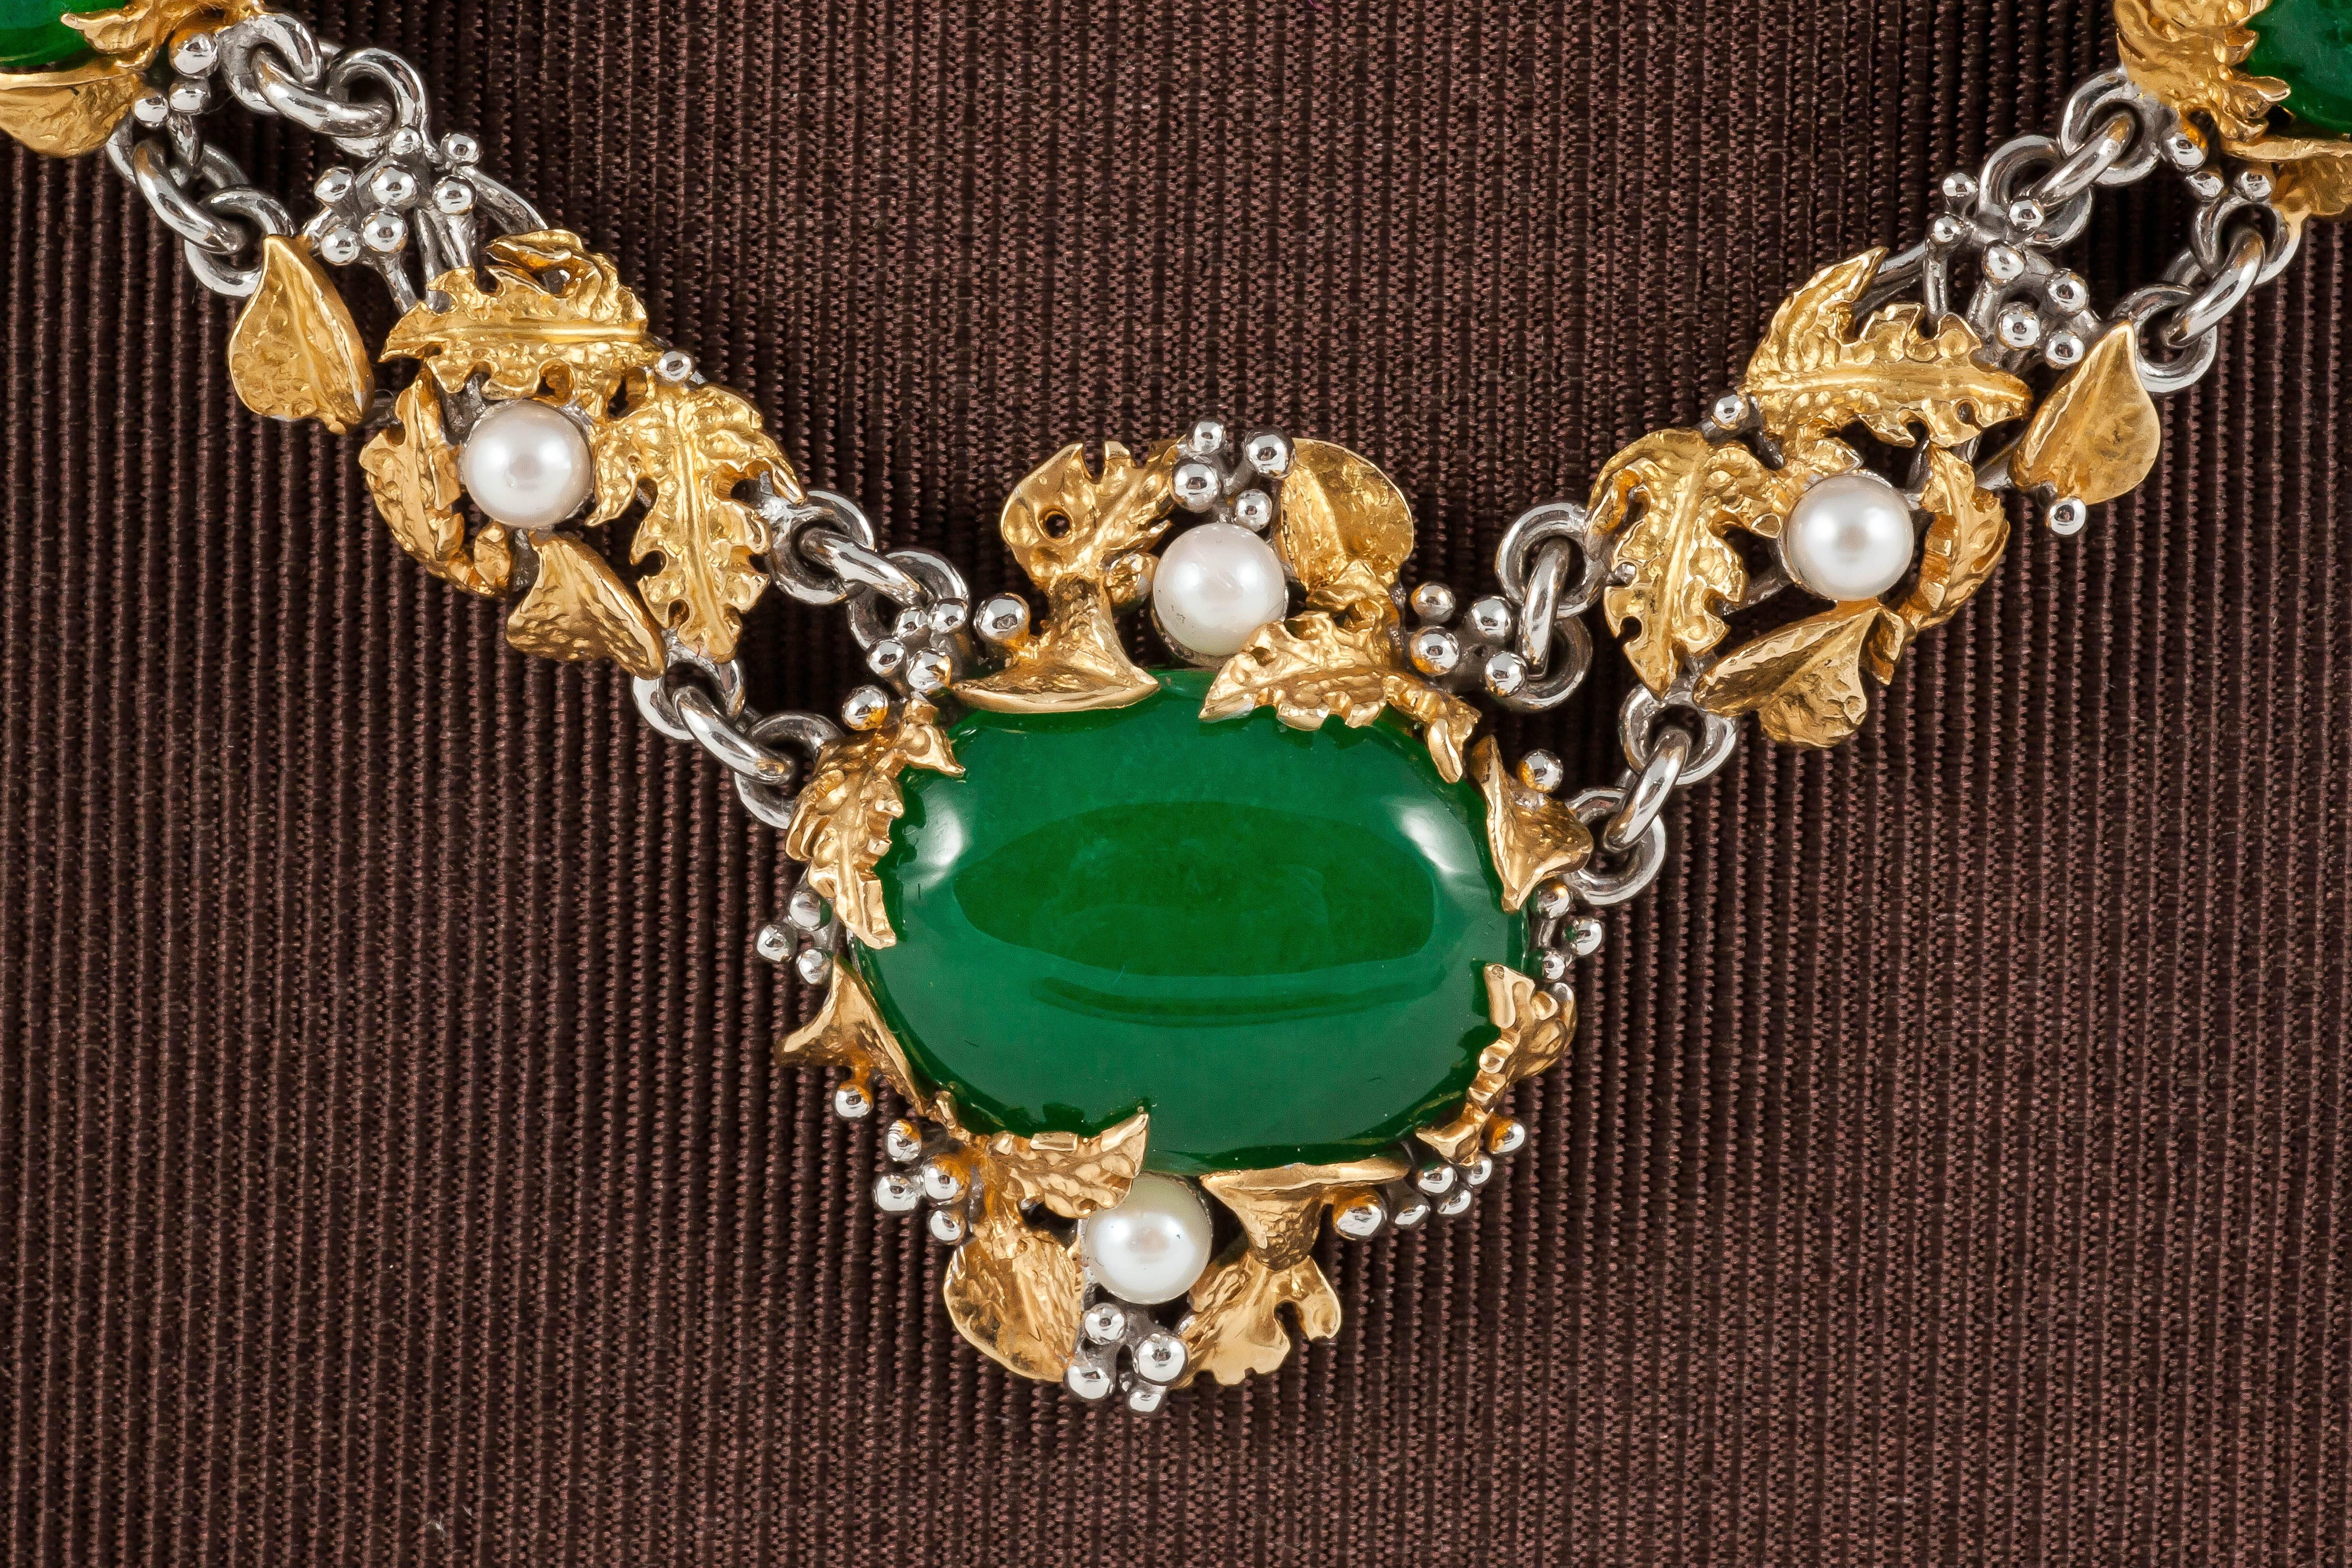 Green Jade surrounded with carved Gold leaves and Pearls Necklace and Studs

Necklace - £16,000
18K Yellow Gold - 108.5gms
Pearl  - 13 pieces 
Jade - 11 pieces

Middle pendant 3cm x 2.5cm 

Earring - £4,700 
18K Yellow Gold - 14.1gms
Jade